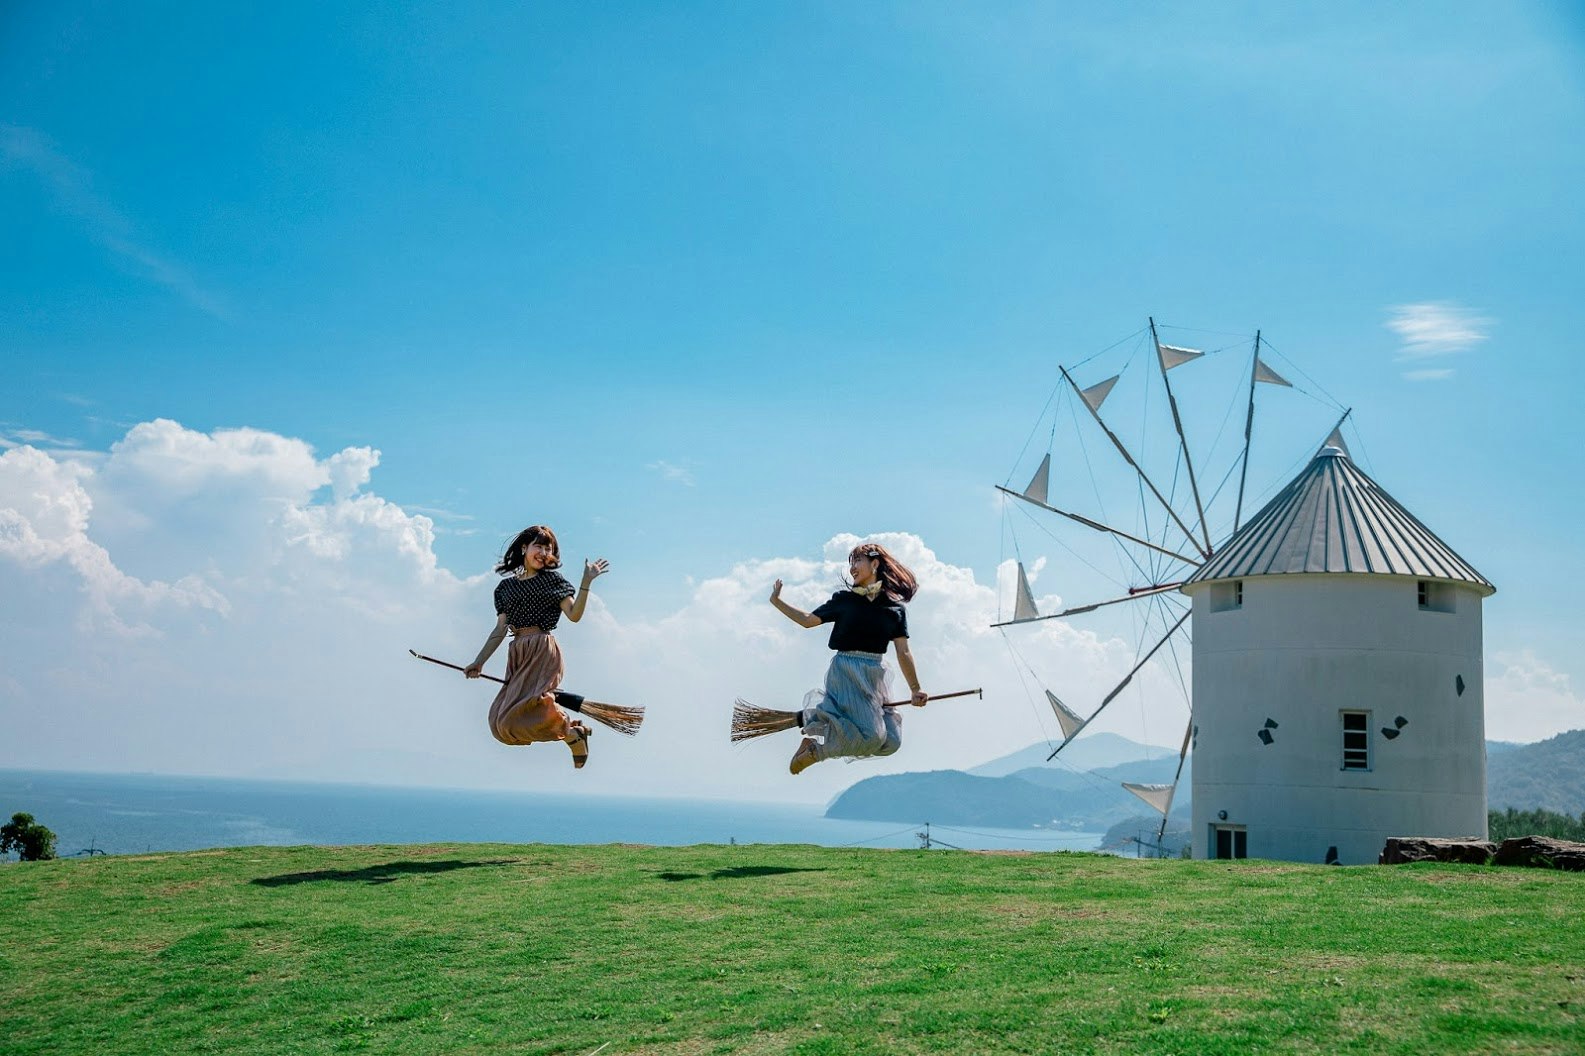 Two women pose for photos in Shodo-shima Olive Park by jumping up on brooms to look as if they're flying like the teenage witch in Studio Ghibli's film "Kiki's Delivery Service." A windmill sits in the background